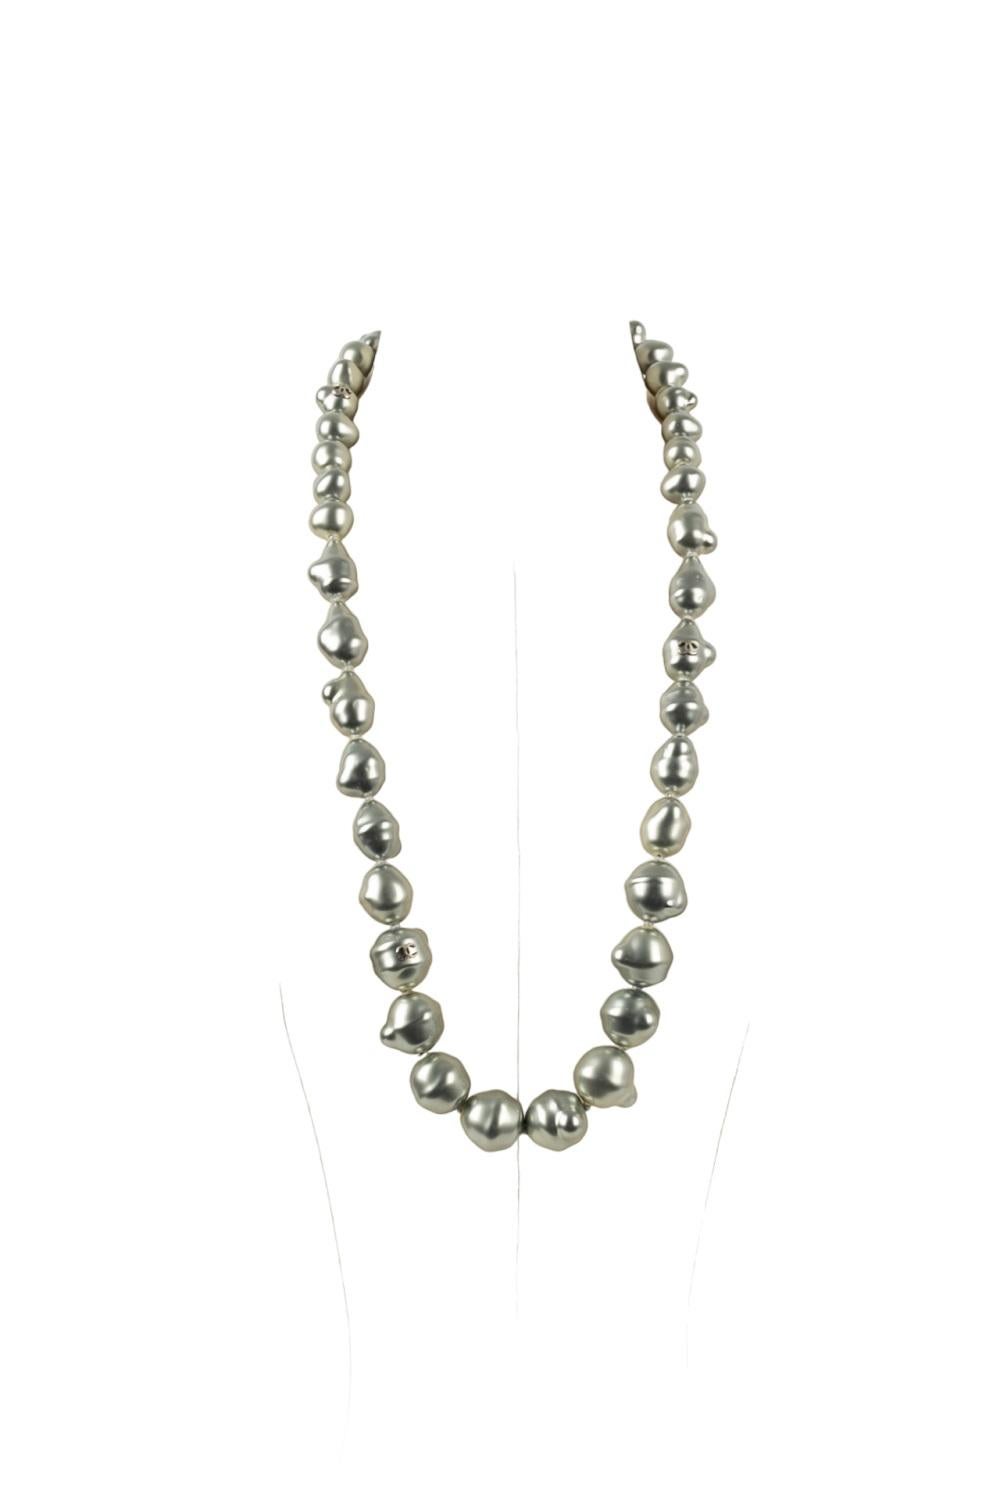 Chanel - (Made in France) Necklace with grey pearly baroque beads. Spring-Summer 1998 collection.

Additional information:
Condition: Very good condition
Dimensions: Length : 80 cm
Period: 20th Century

Seller Reference: CB67
